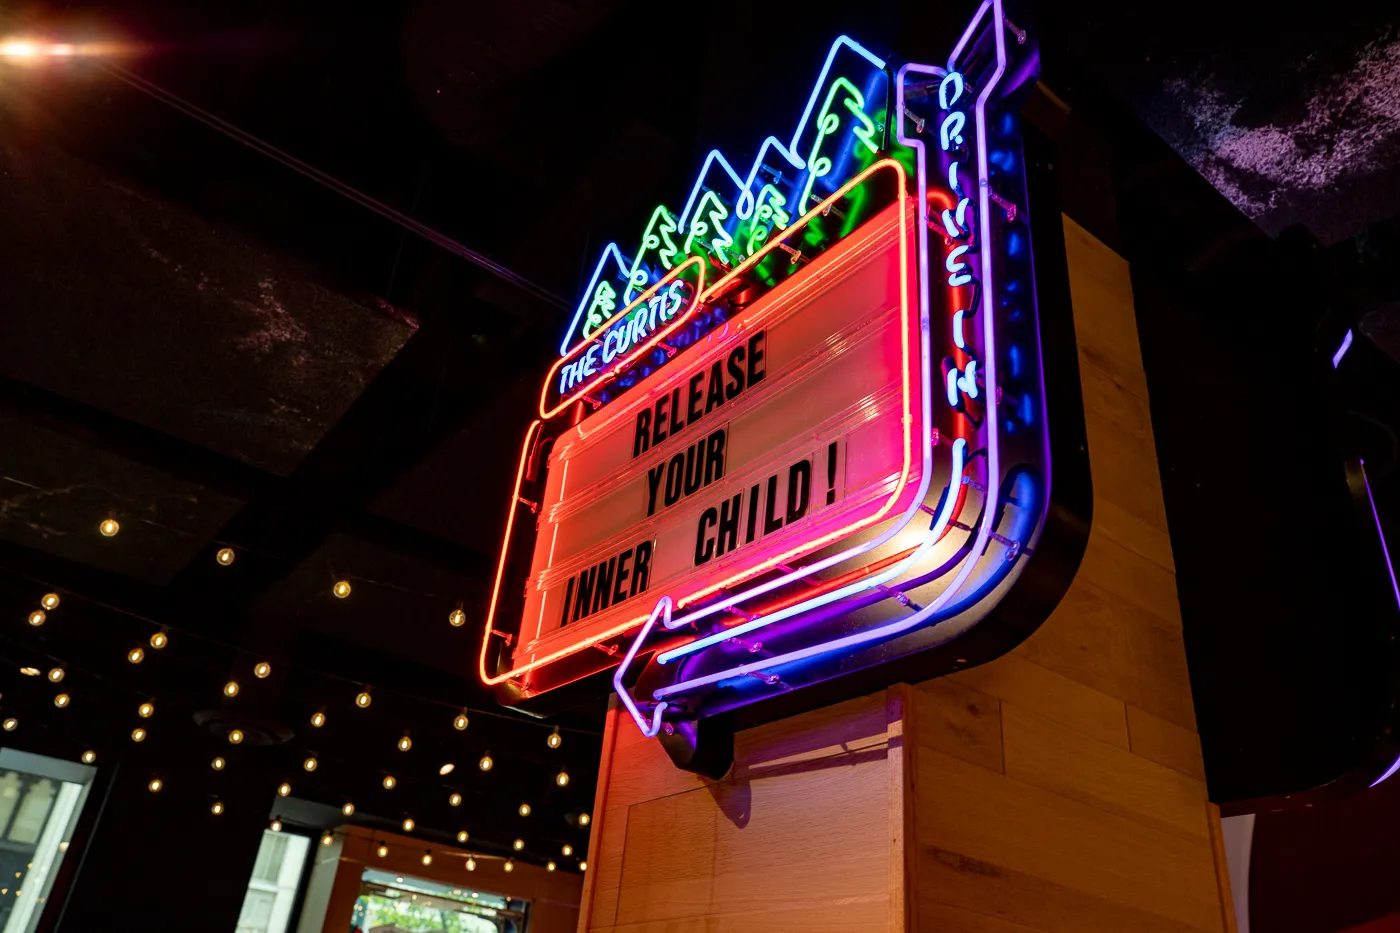 Release Your Inner Child Neon Sign at The Curtis Hotel - a Themed Hotel in Denver, Colorado